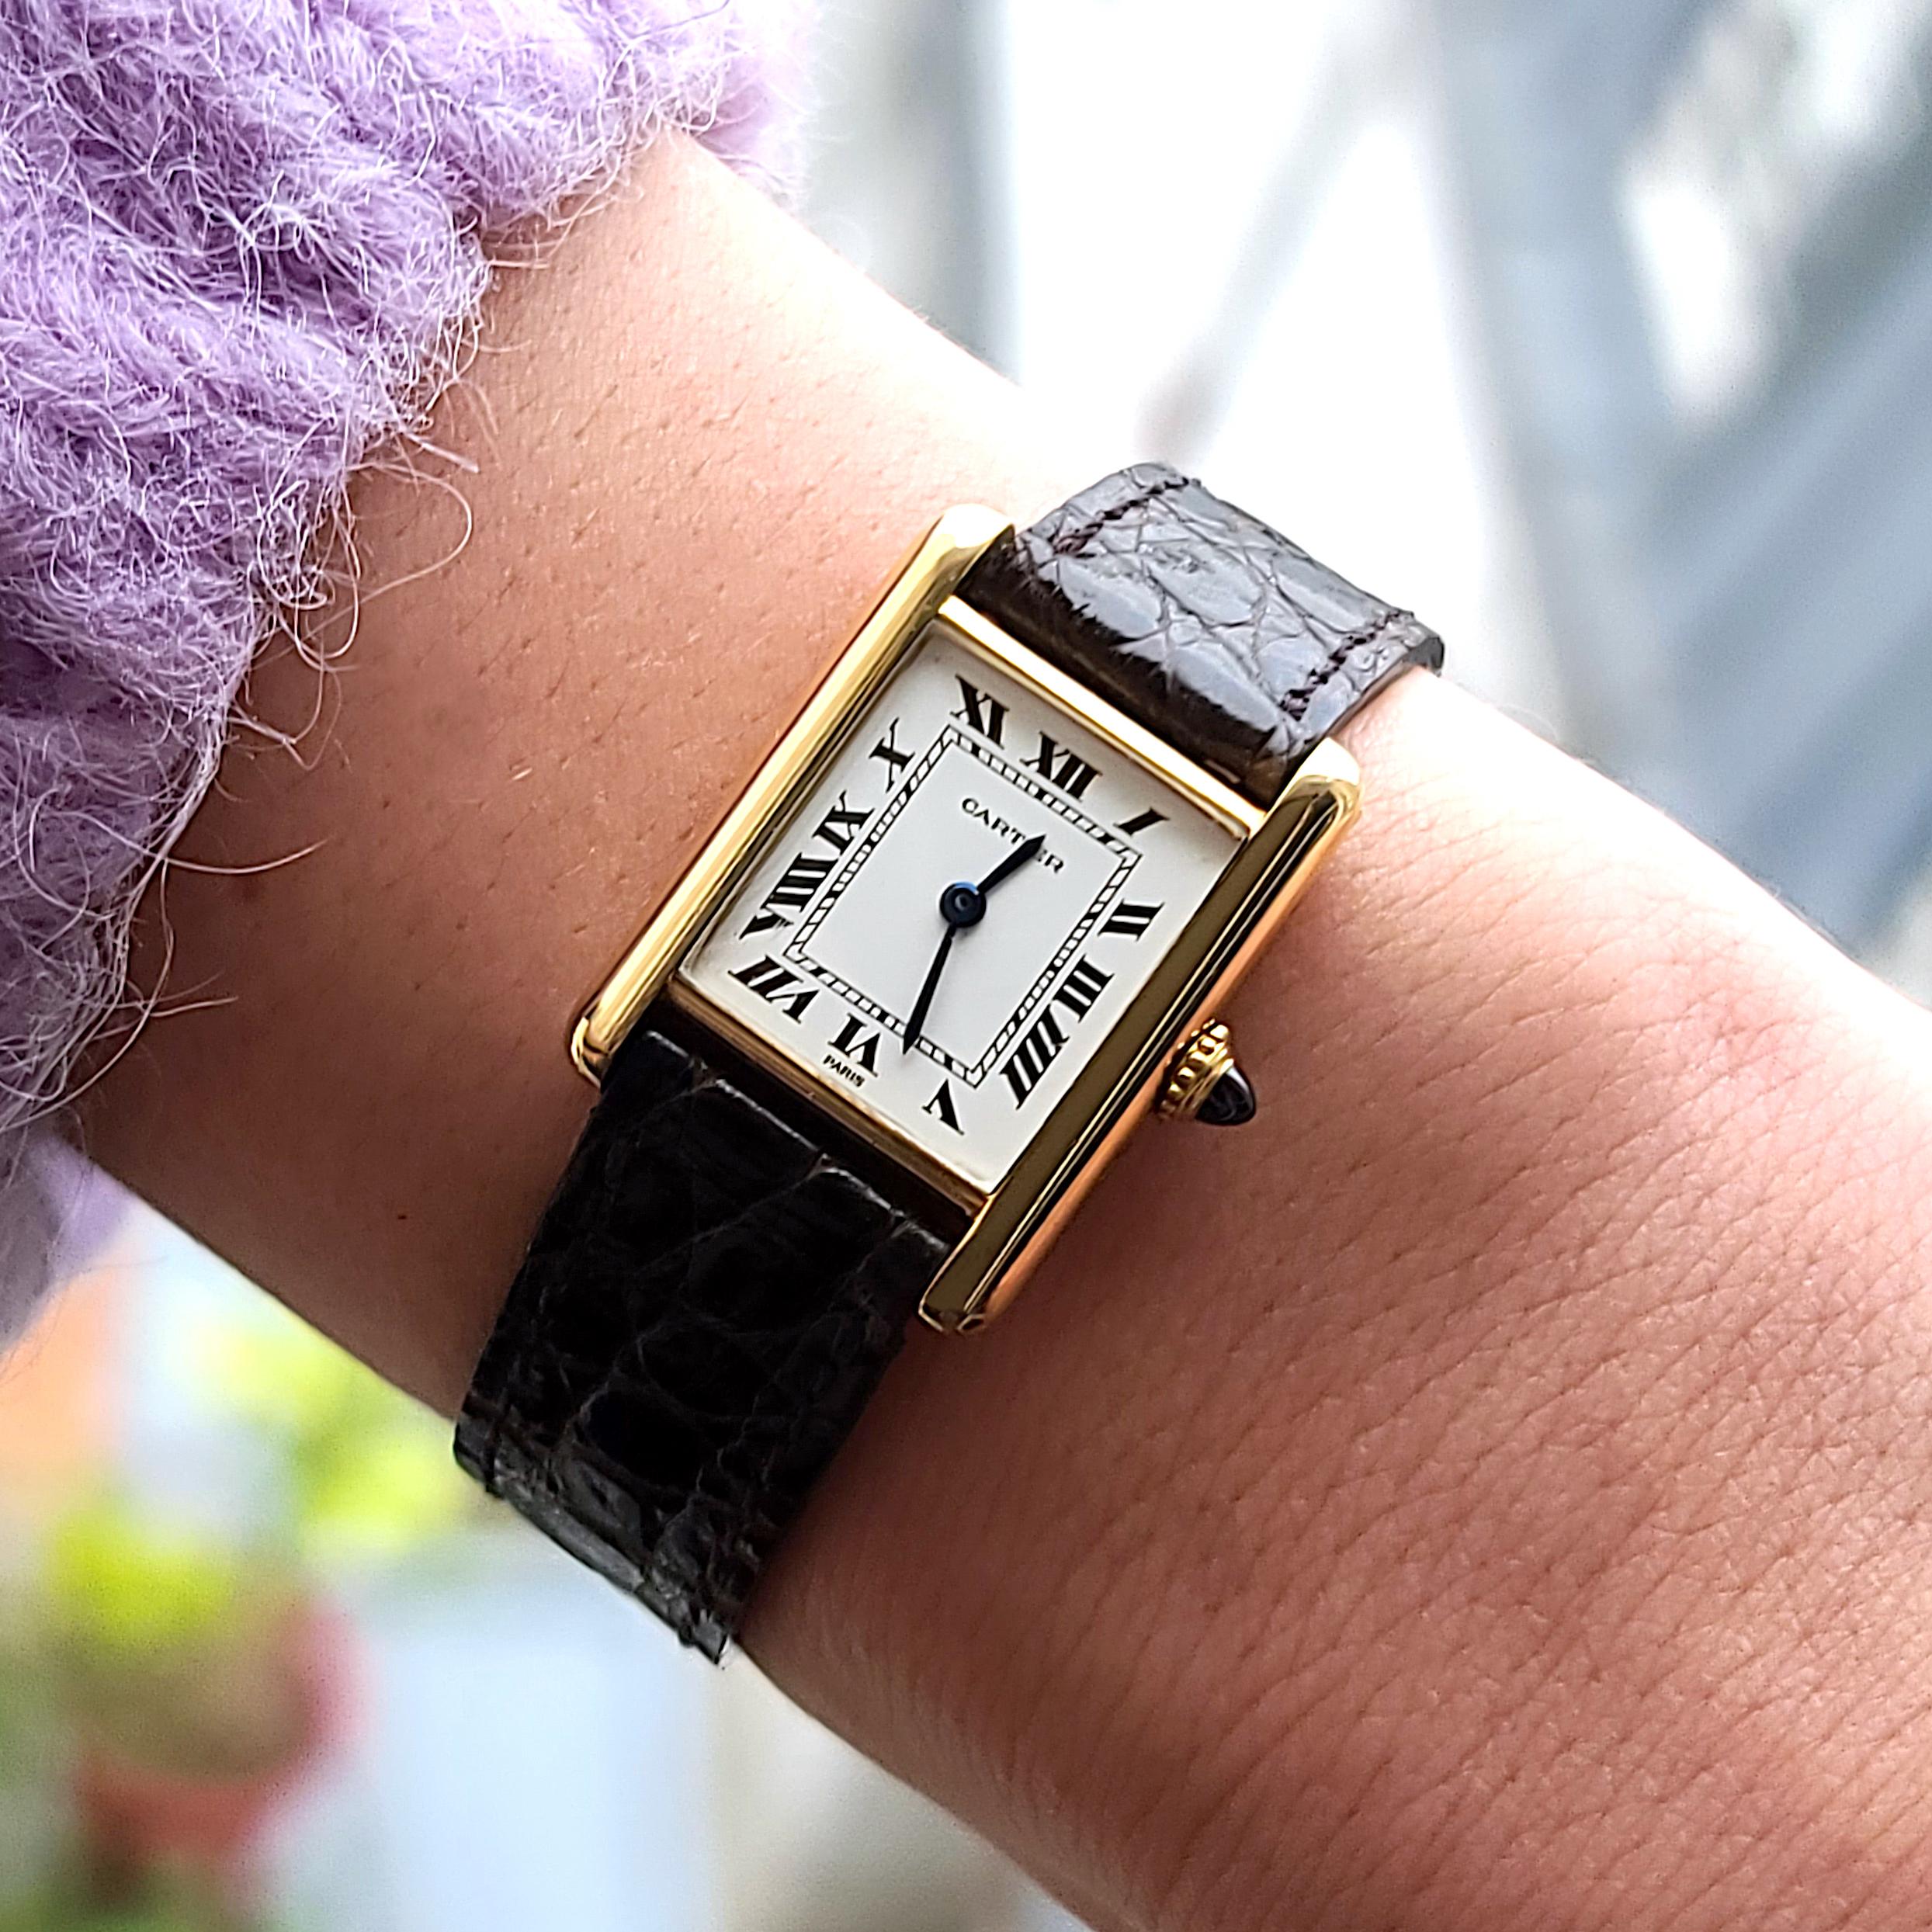 CARTIER
Founded in 1847
For the discerning ones

Wear Cartier watch it's integrate the club of famous clients : Jackie Kennedy, Princess Diana, the Duchess of Windsor, Princess Grace, Barbara Hutton, Elizabeth Taylor, Andy Warhol, Yves Saint